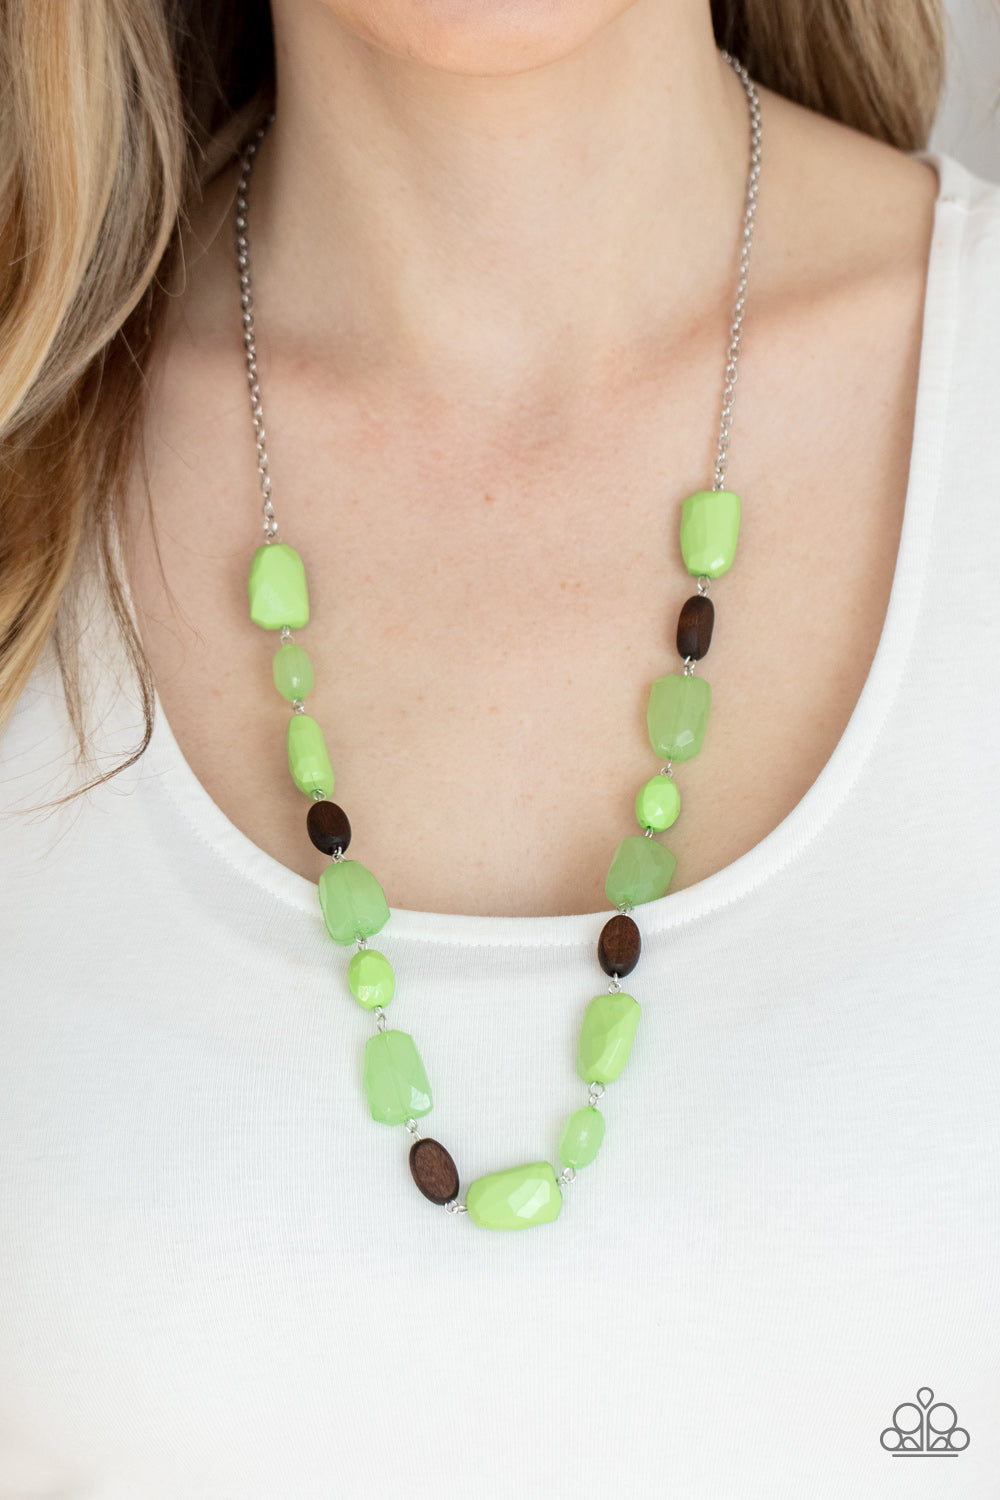 Meadow Escape - Green and Brown Wood - Necklace & Earrings - Paparazzi Accessories - 
Varying in opacity, a mixed assortment of faceted Apple Green beads delicately link with dainty wooden beads across the chest, creating a whimsically earthy display. Features an adjustable clasp closure.
